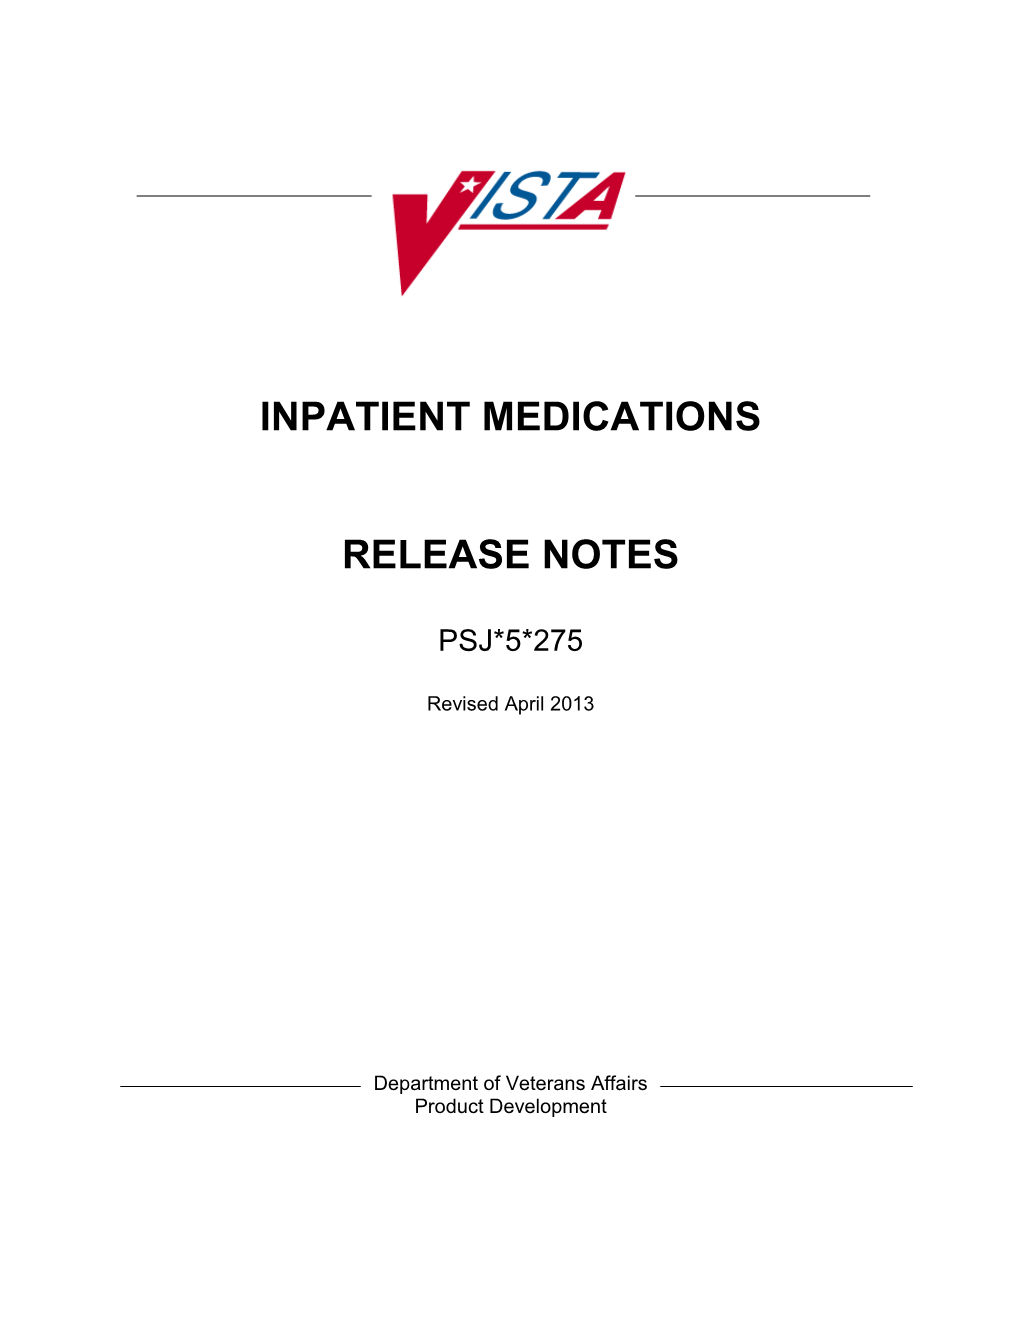 Department of Veterans Affairs Inpatient Medications Release Notes